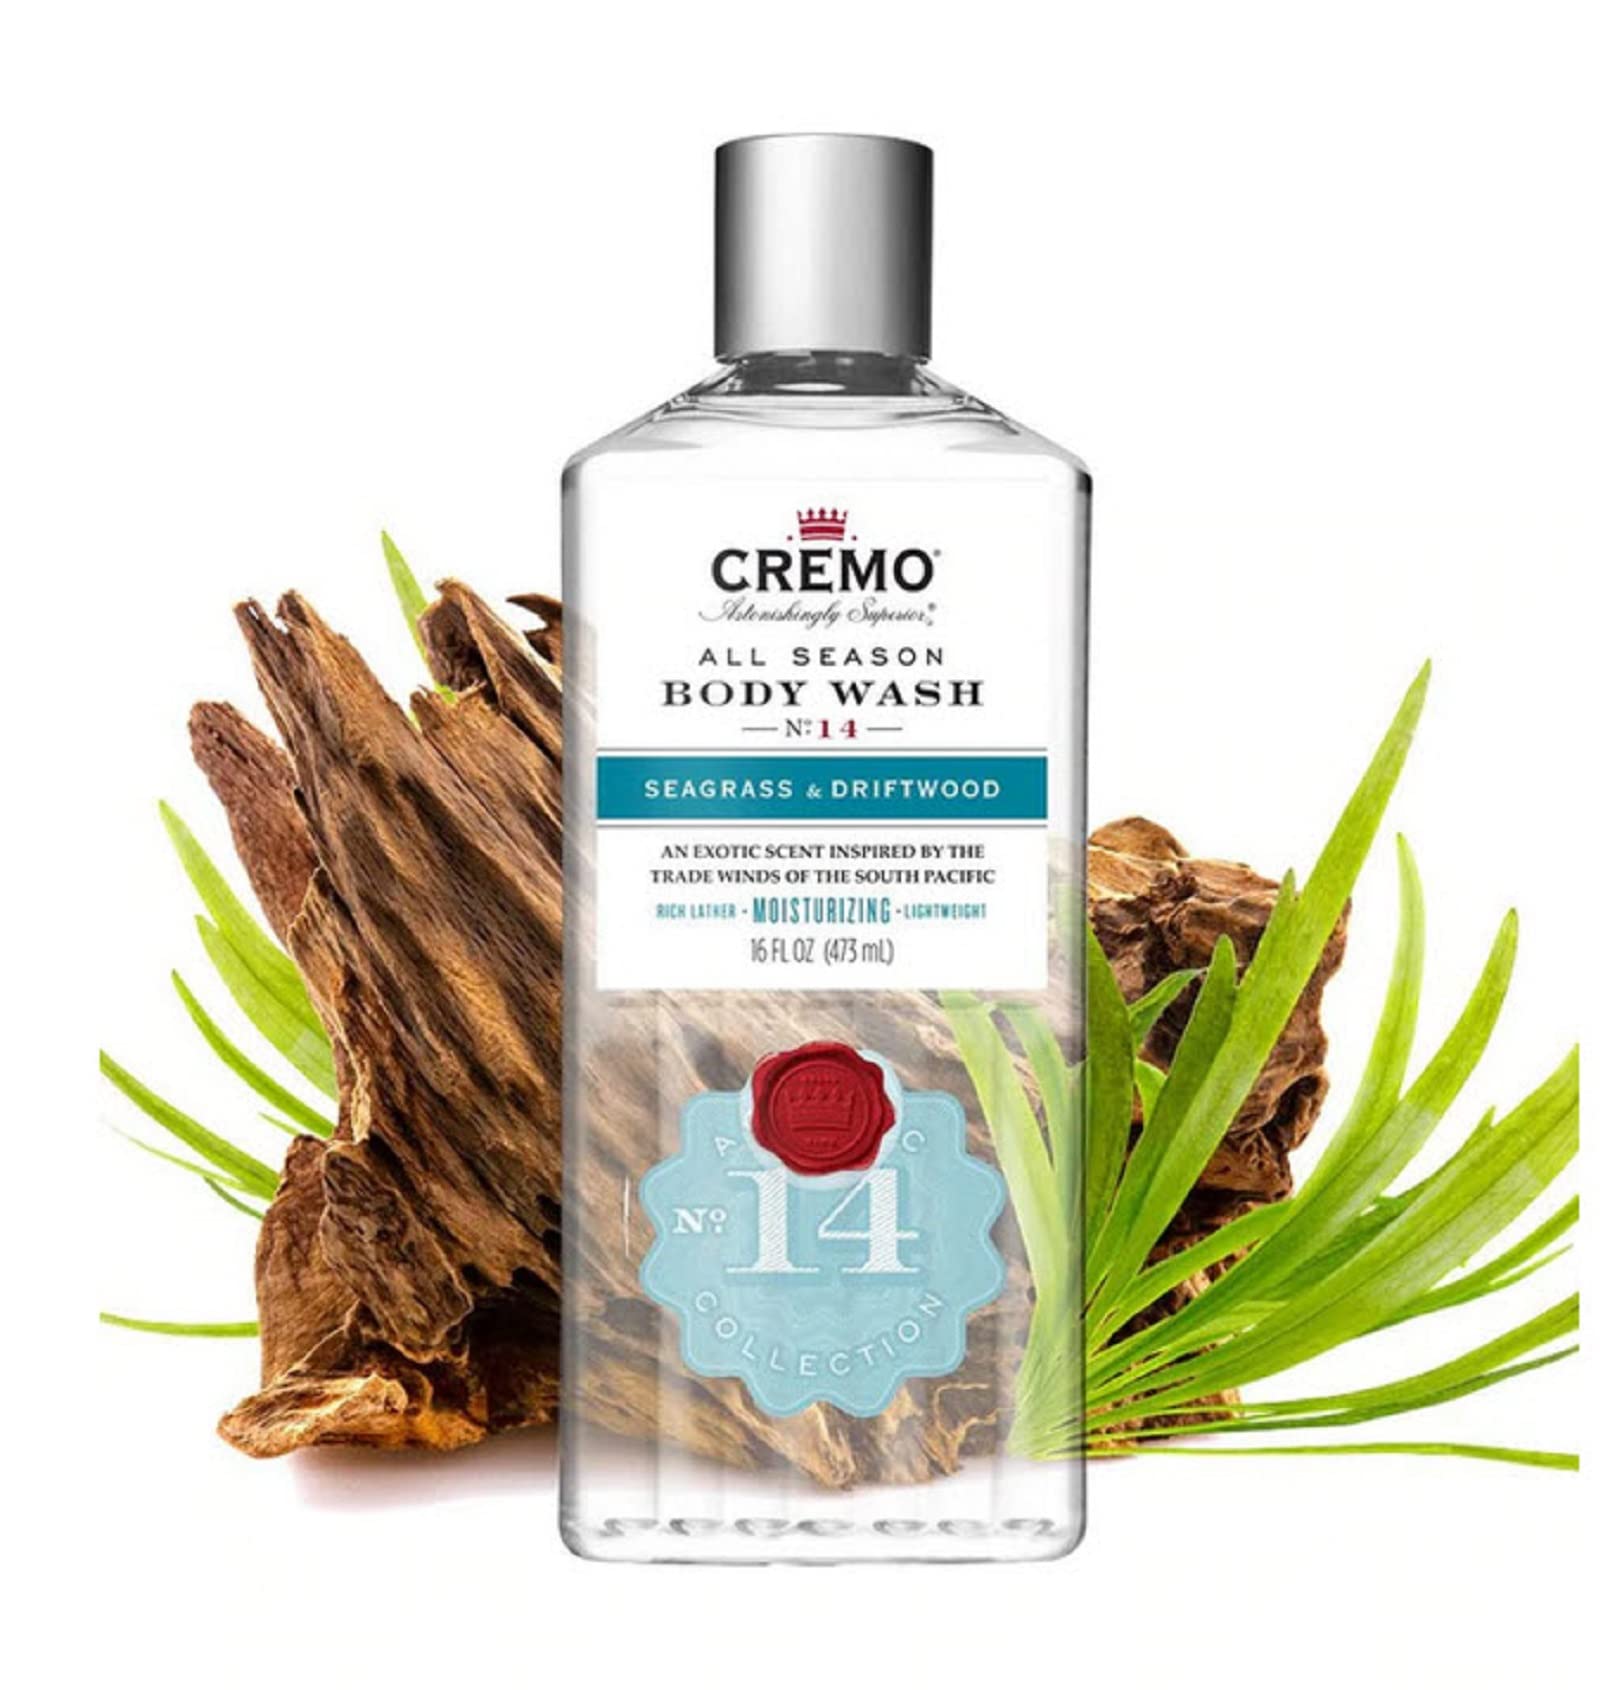 Cremo Rich-Lathering Seagrass & Driftwood Body Wash, A Coastal Scent with Notes of Sea Salt, Seagrass & Driftwood, 16 Fl Oz (2-Pack)